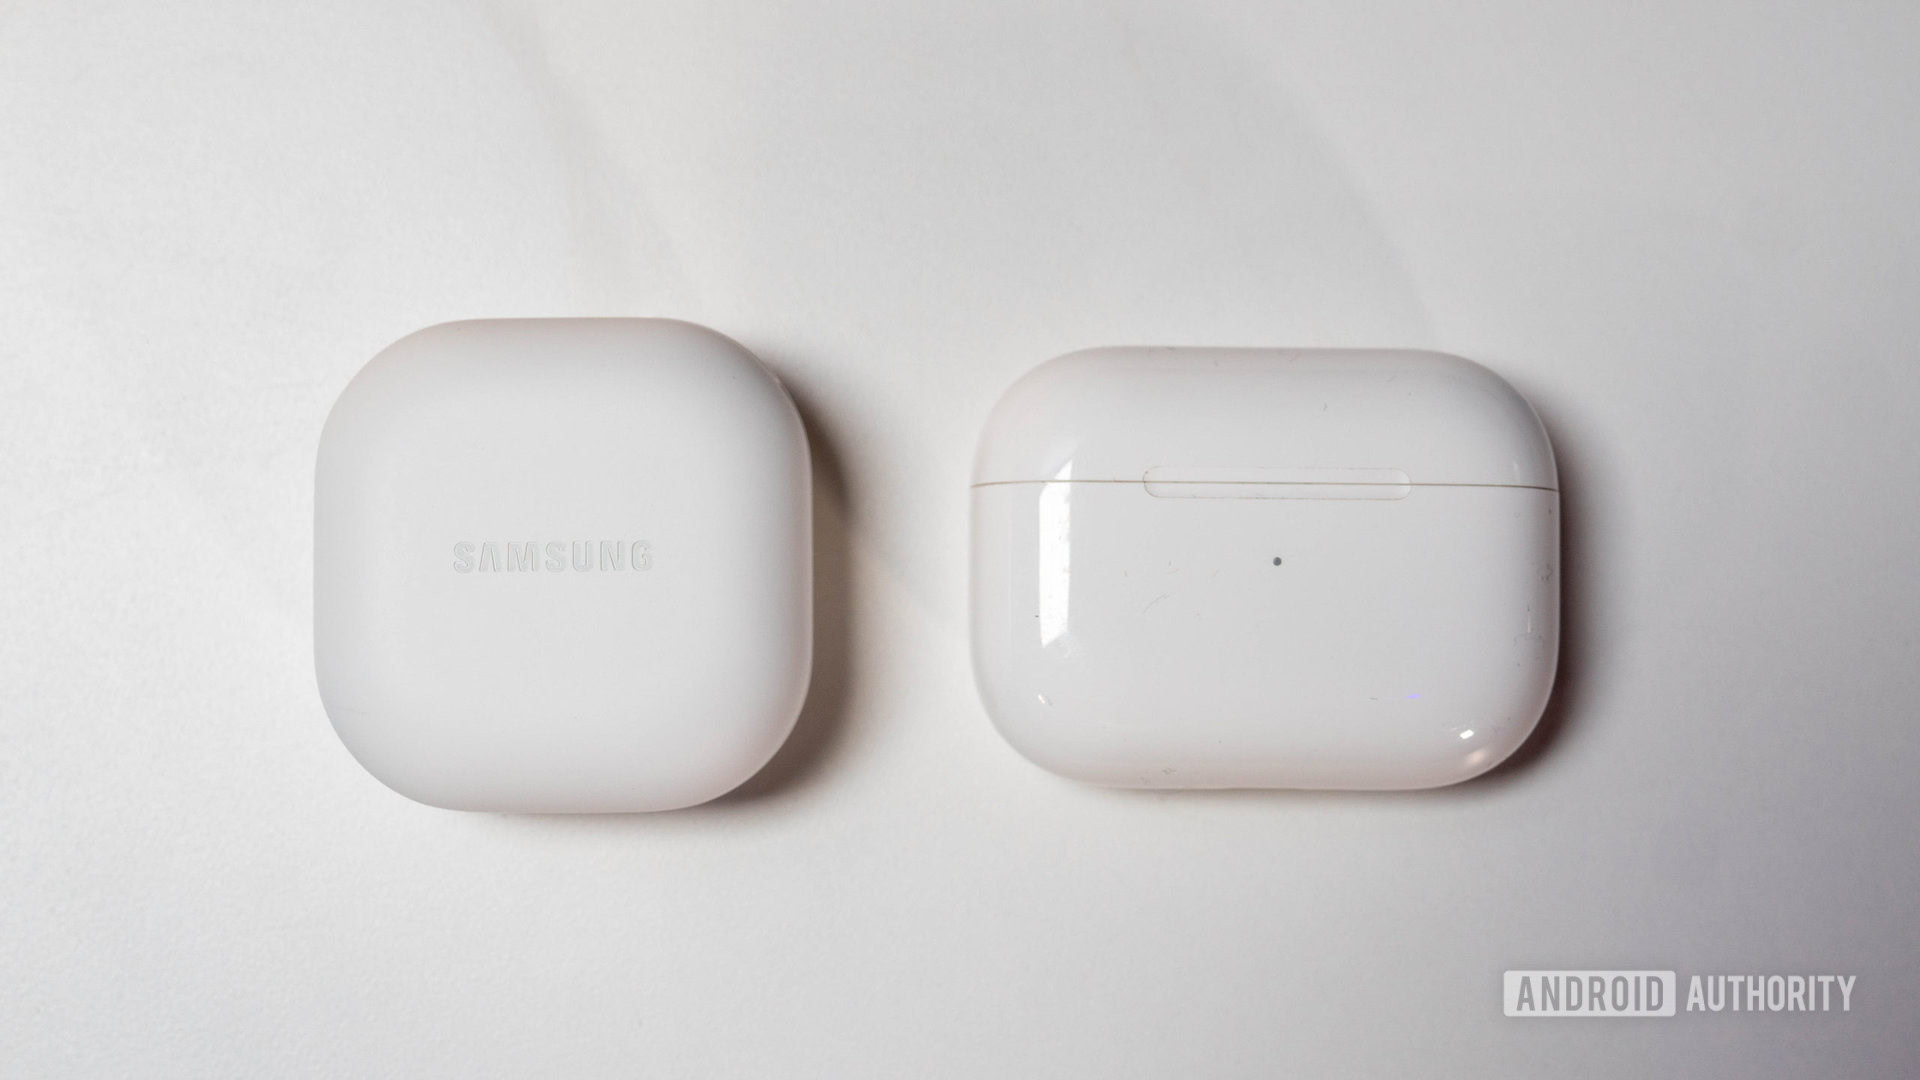 Compared: Samsung Galaxy Buds 2 versus AirPods and AirPods Pro